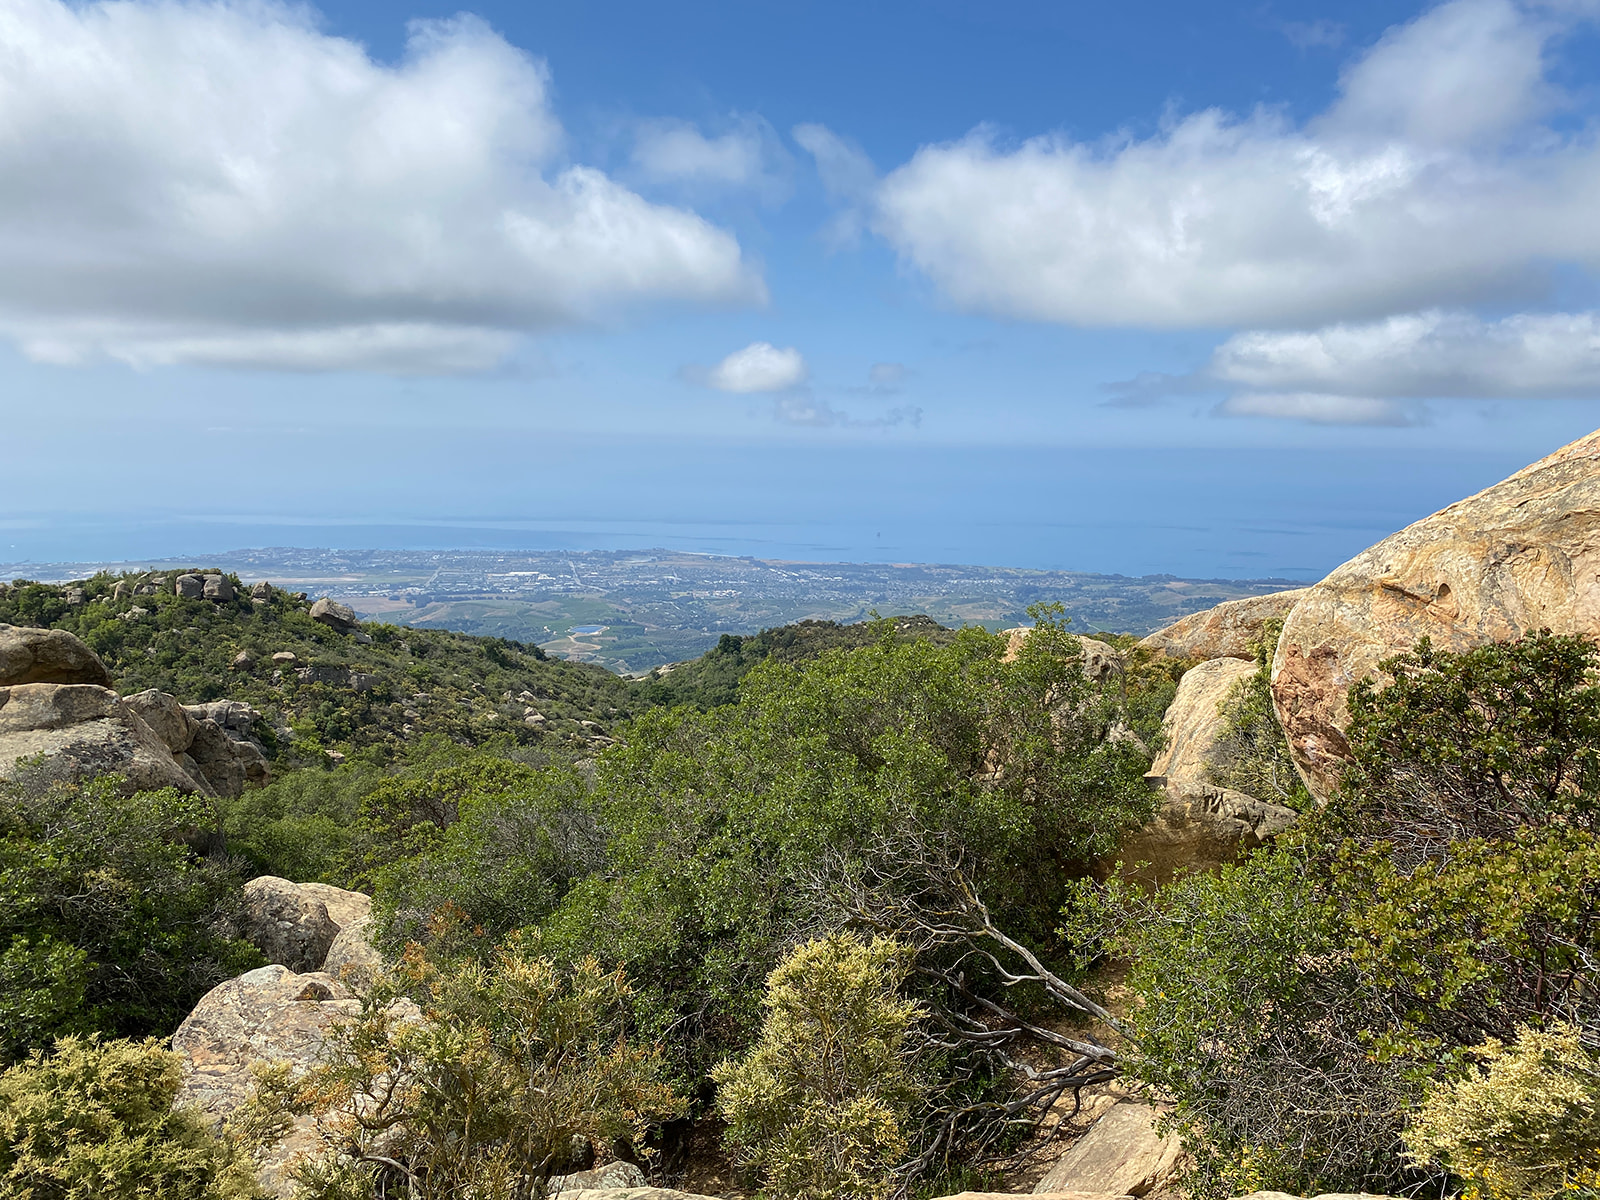 View from the hiking trail at Lizards Mouth Rock by engagement photographer